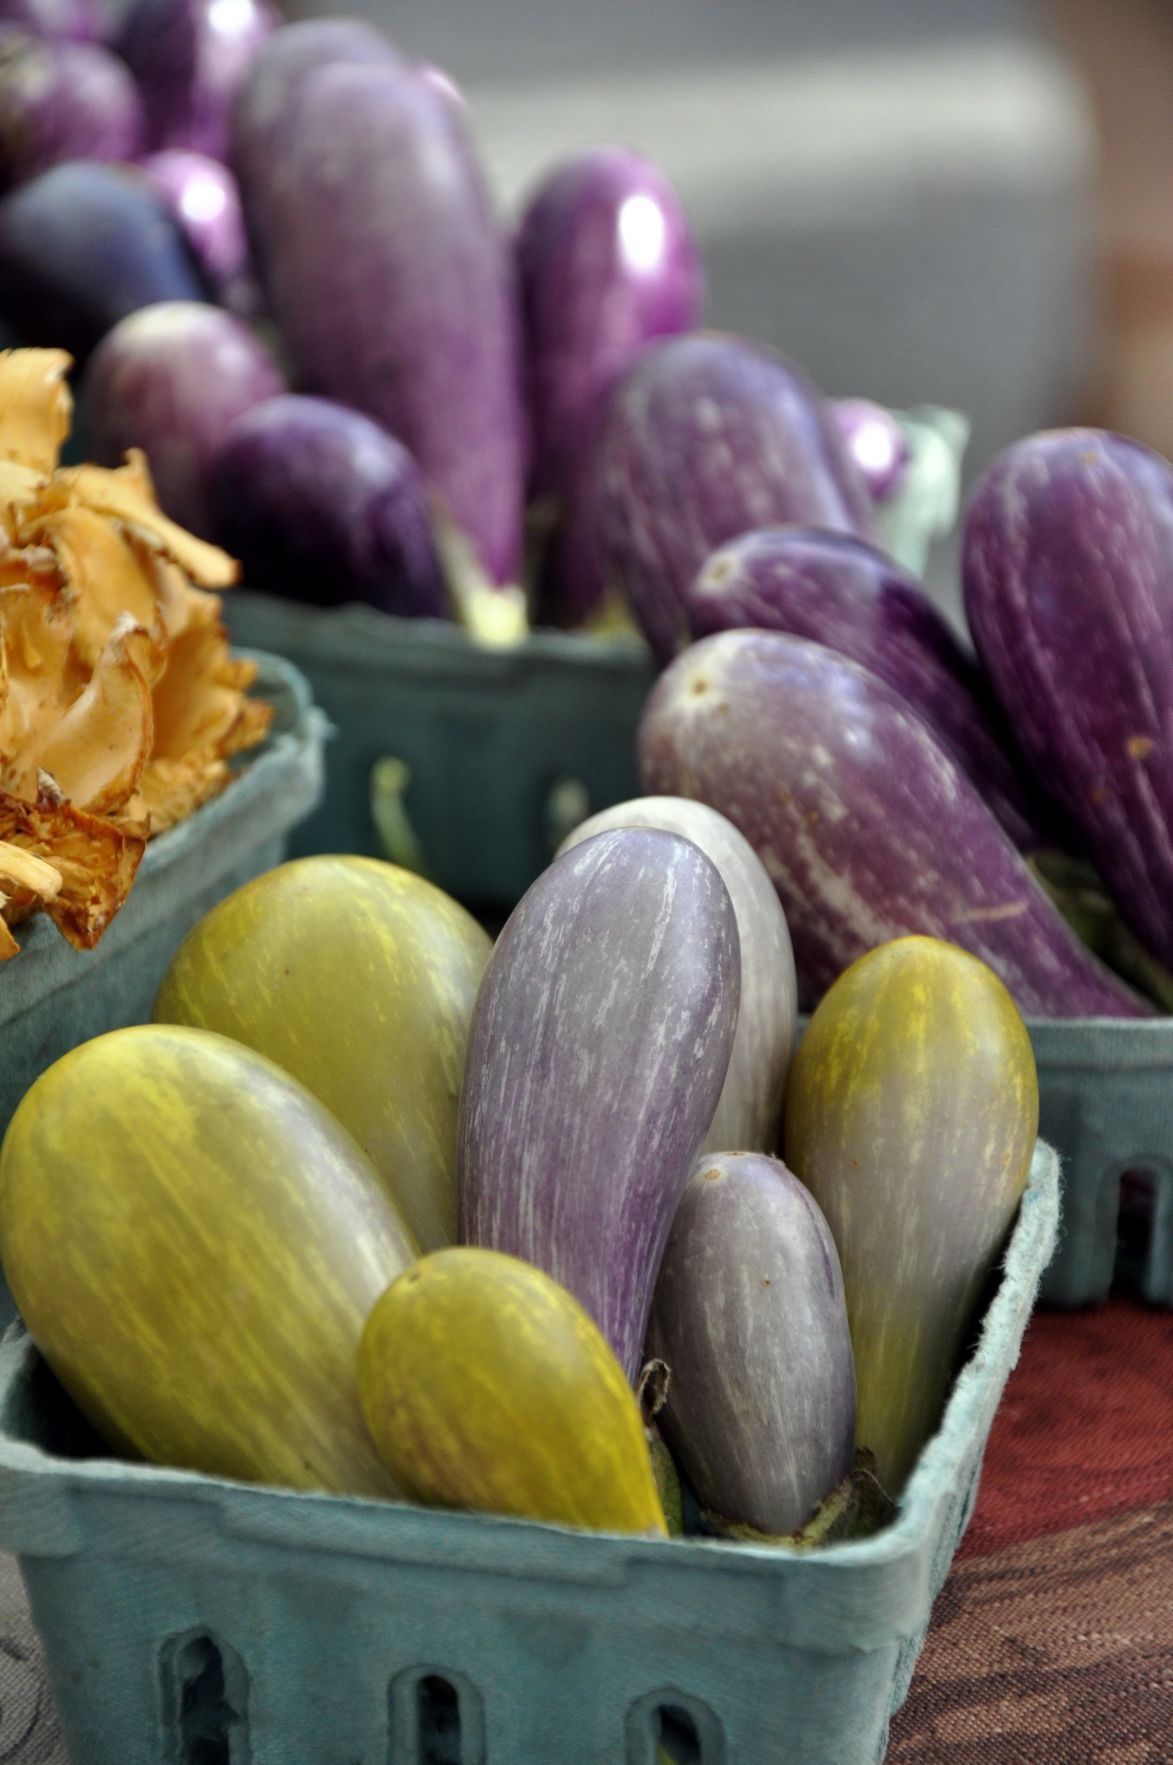 Where to find farmers markets in the St. Louis area | Food and cooking | 0